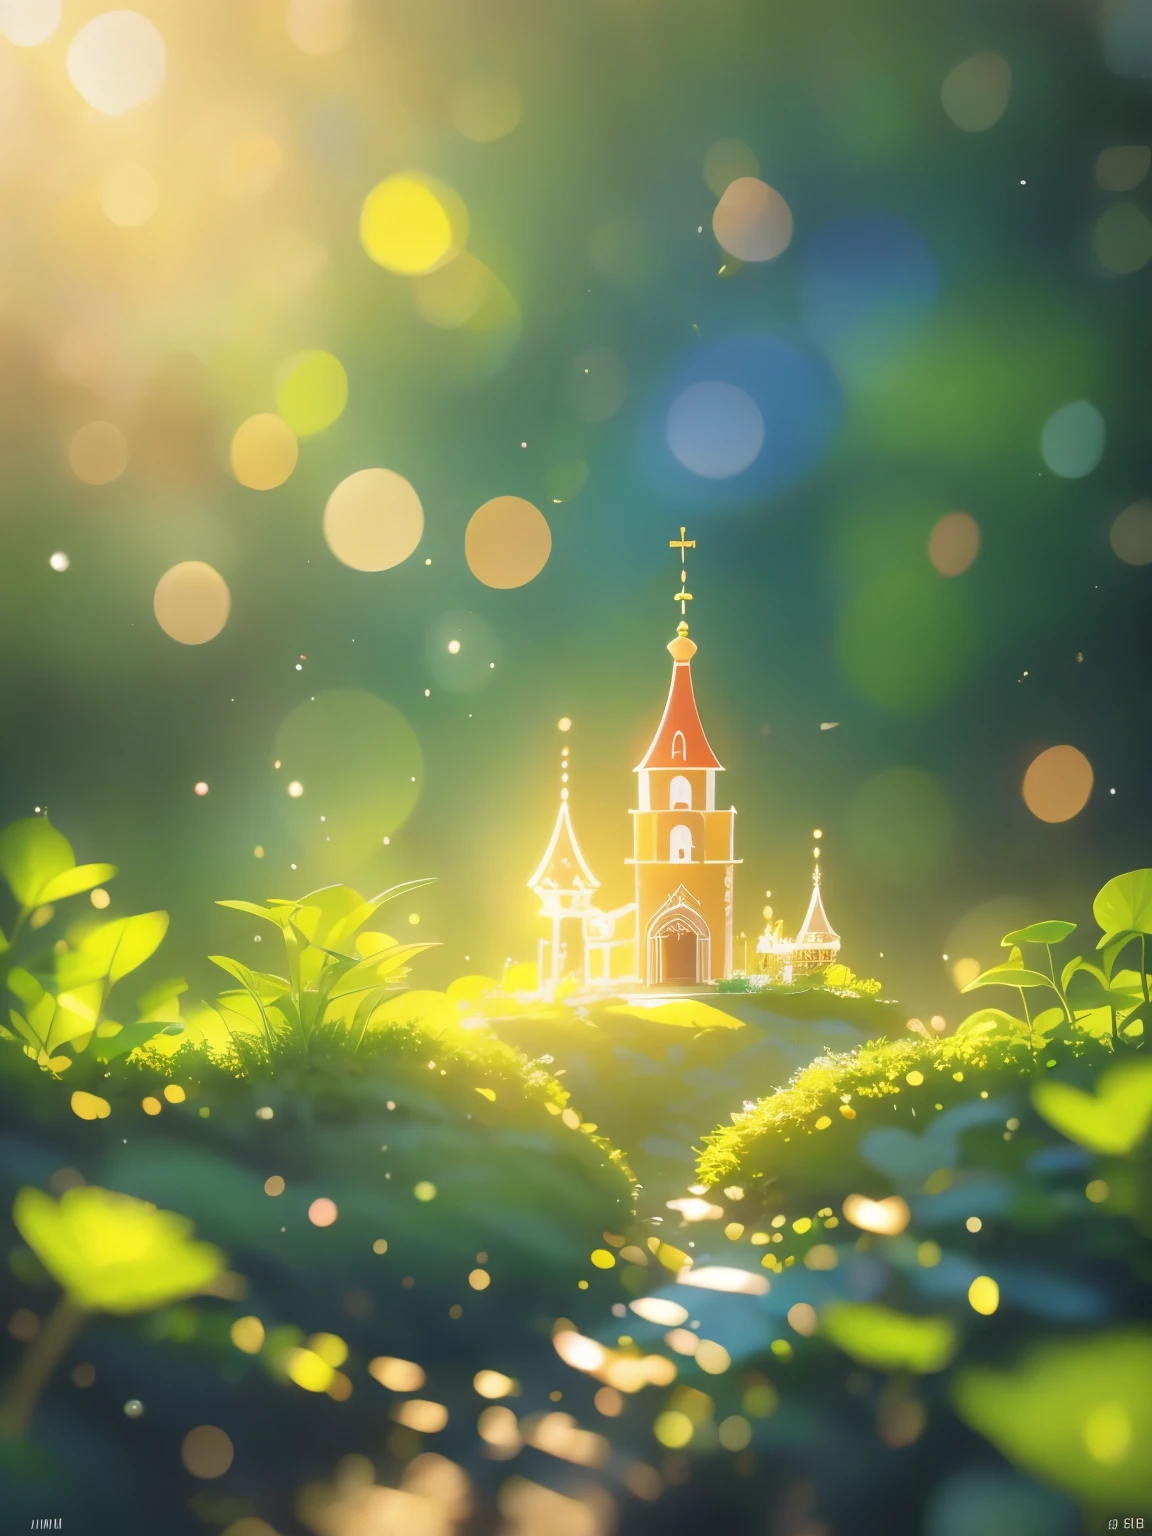 (masterpiece, best quality:1.2), Close up of a cartoon castle on a green background, Cute numbers艺术, Beautifully detailed digital art, 4k high definition illustration wallpaper, Cute numbers, Blurred dream picture, 4k hd wallpaper illustration, Cute 3d rendering, A beautiful artistic illustration, 2d illustration, 2d illustration, Blurred dreamy illustration, Epic Concept Art. Bokeh